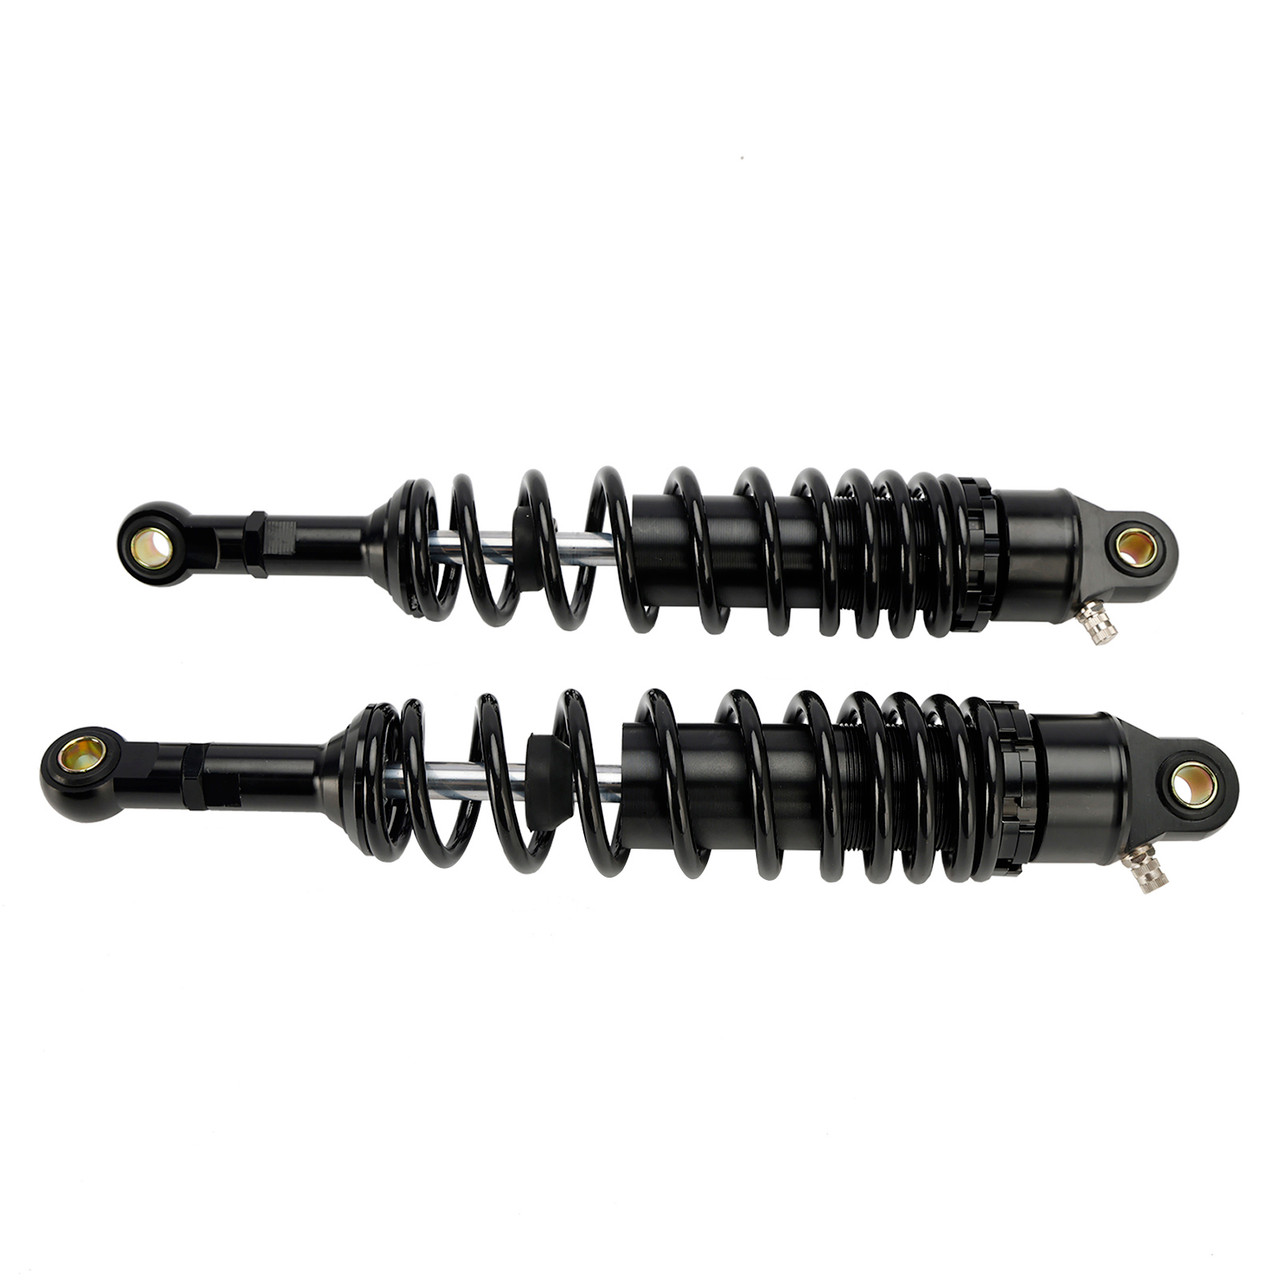 365mm Rear Suspension Air Shock Absorbers fit for Honda CT125 Cross Cub 110 50 A